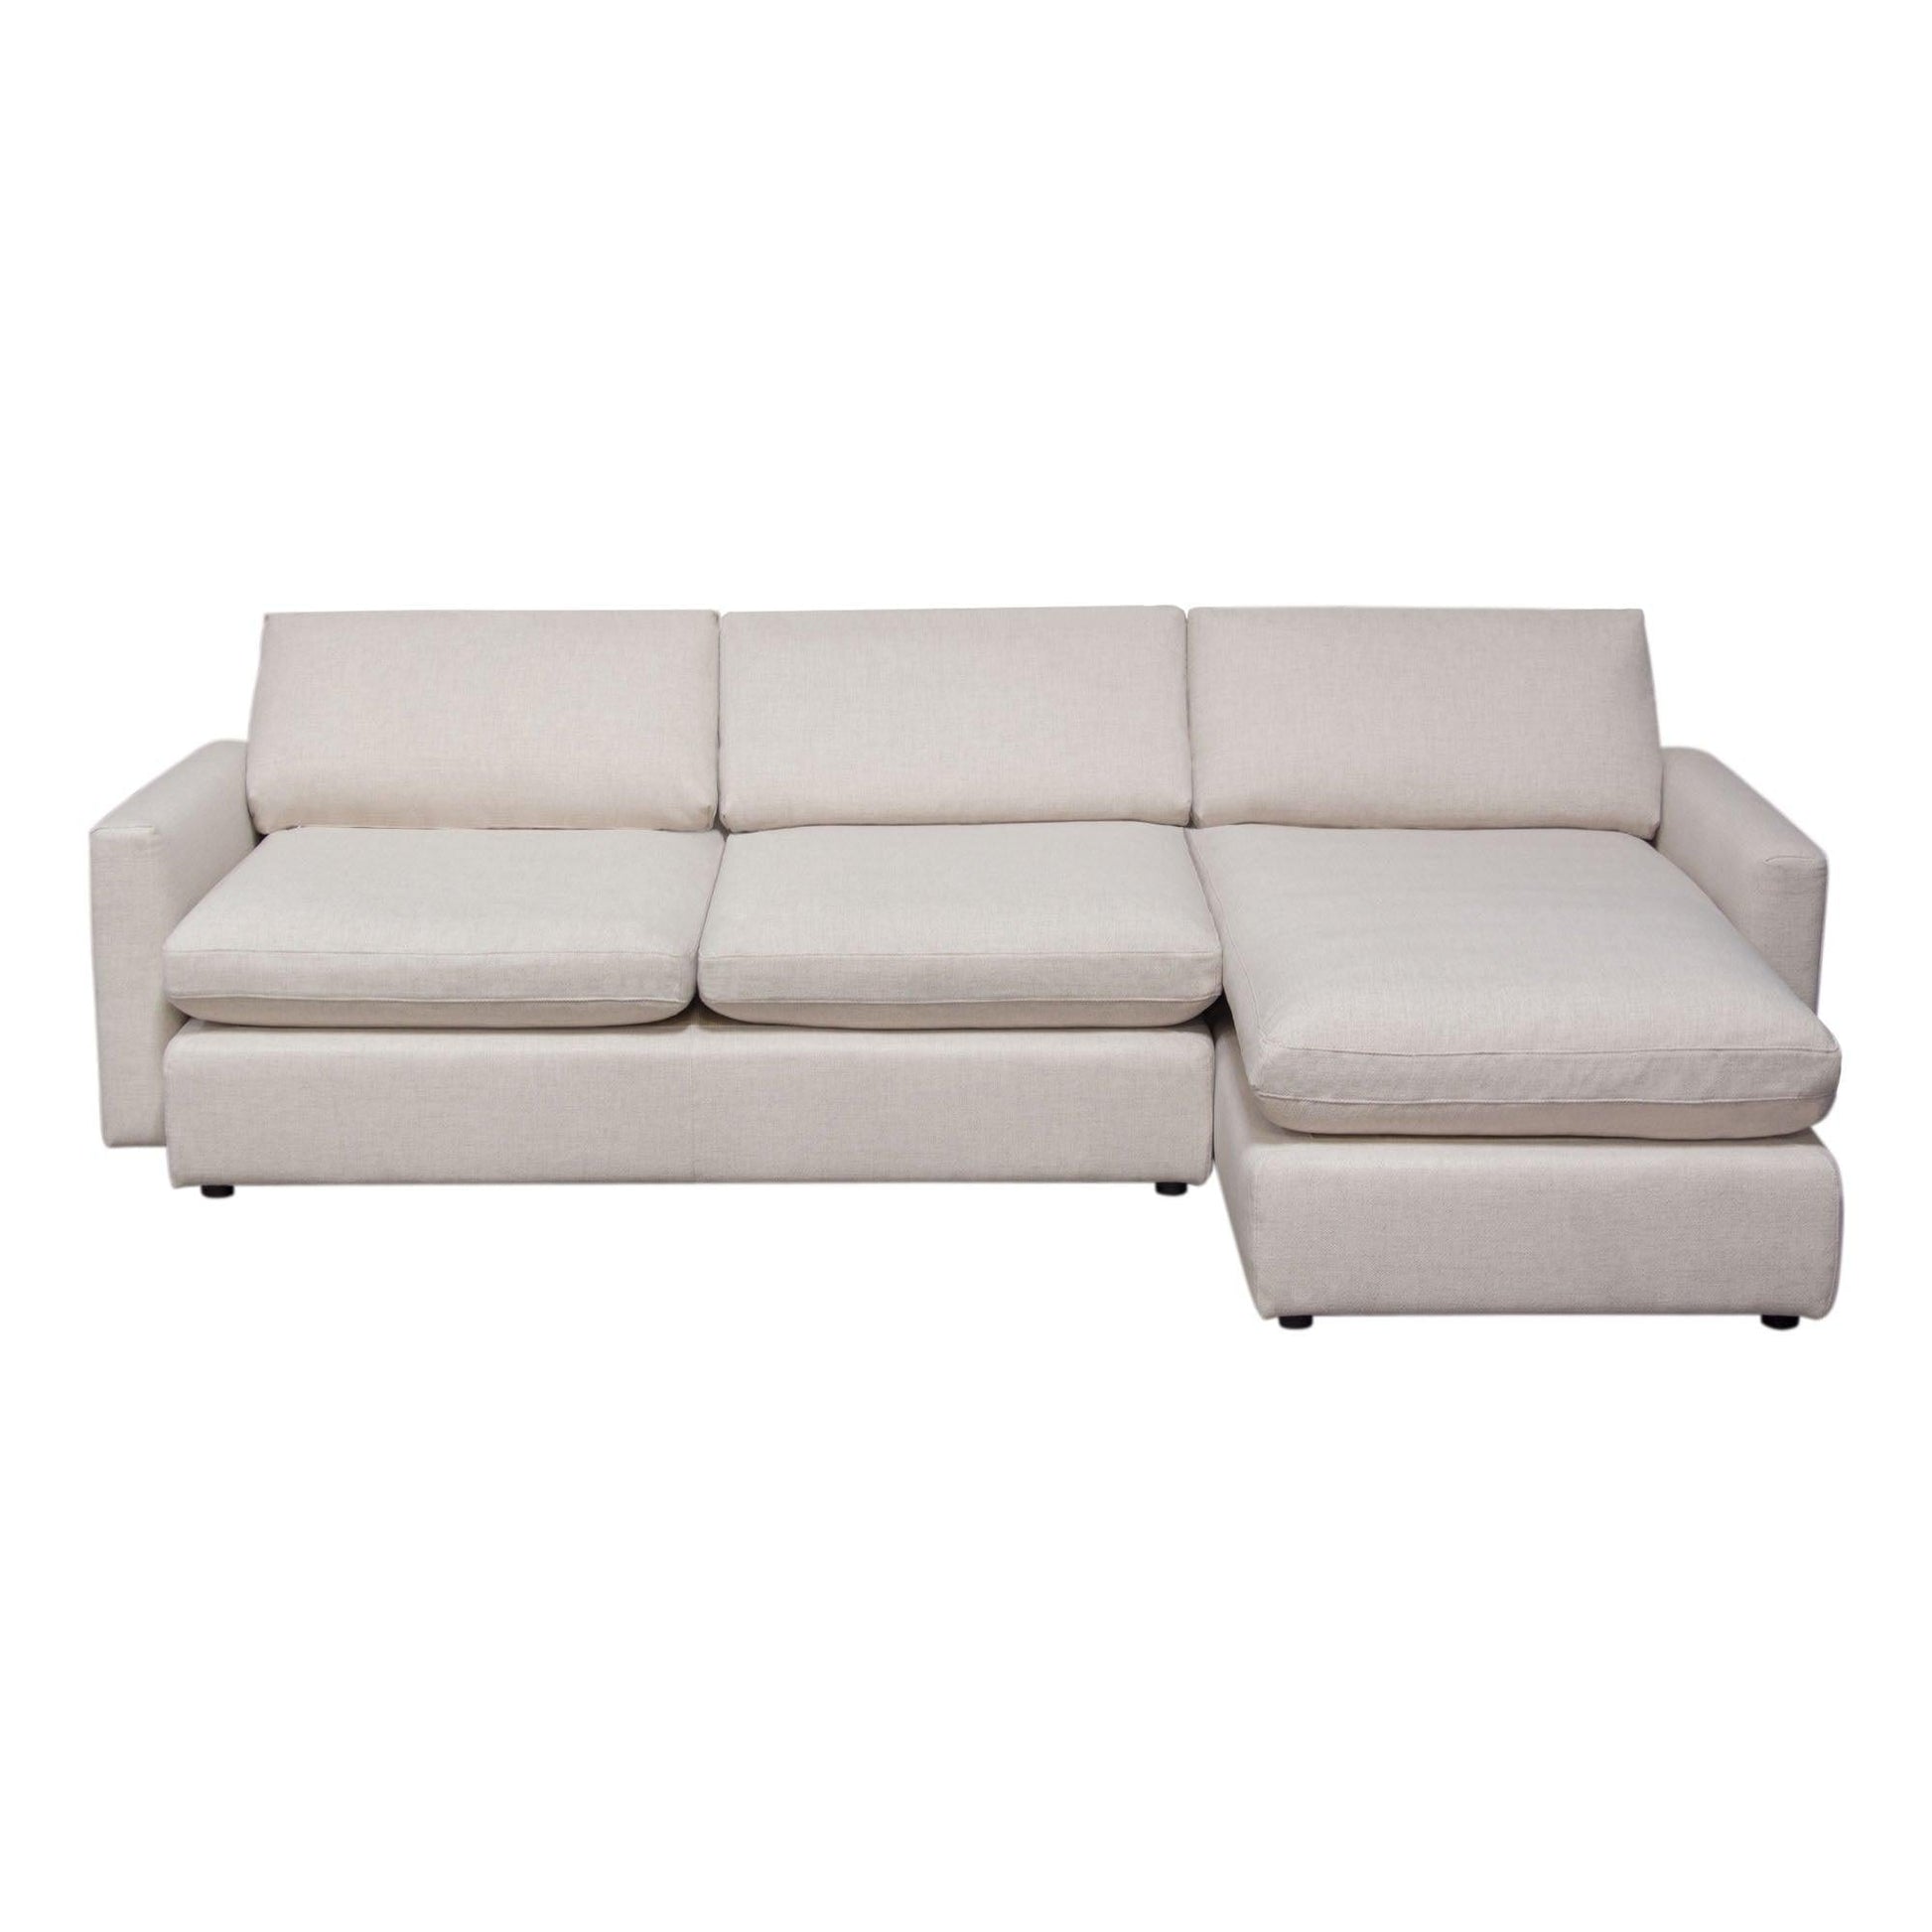 White fabric Right/Left Sectional Down-filled Solid Wood Base Dione Furniture